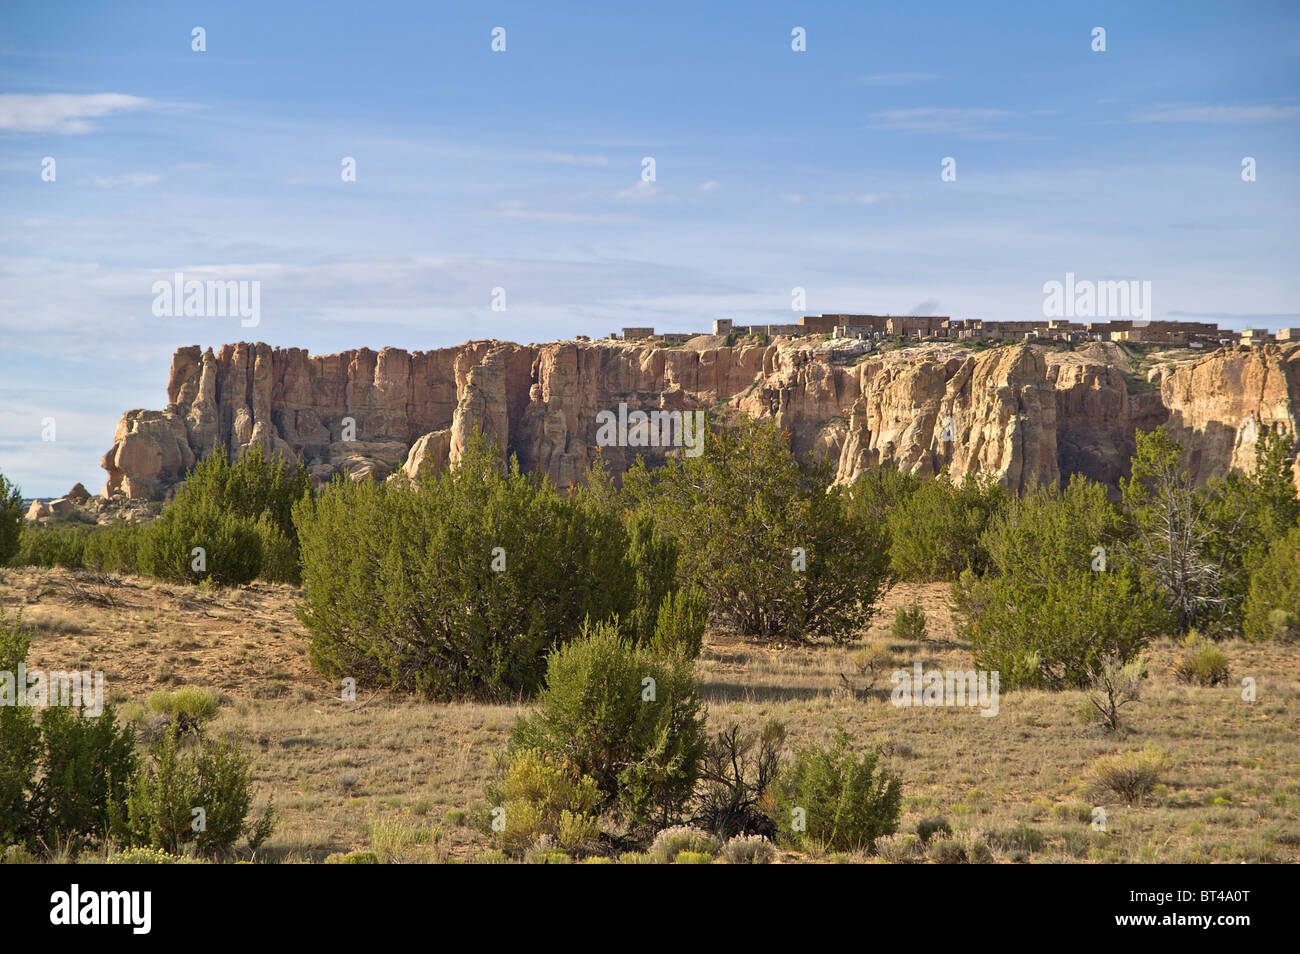 Sky City - The Acoma Pueblo built on top of a sandstone mesa in New Mexico, USA Stock Photo